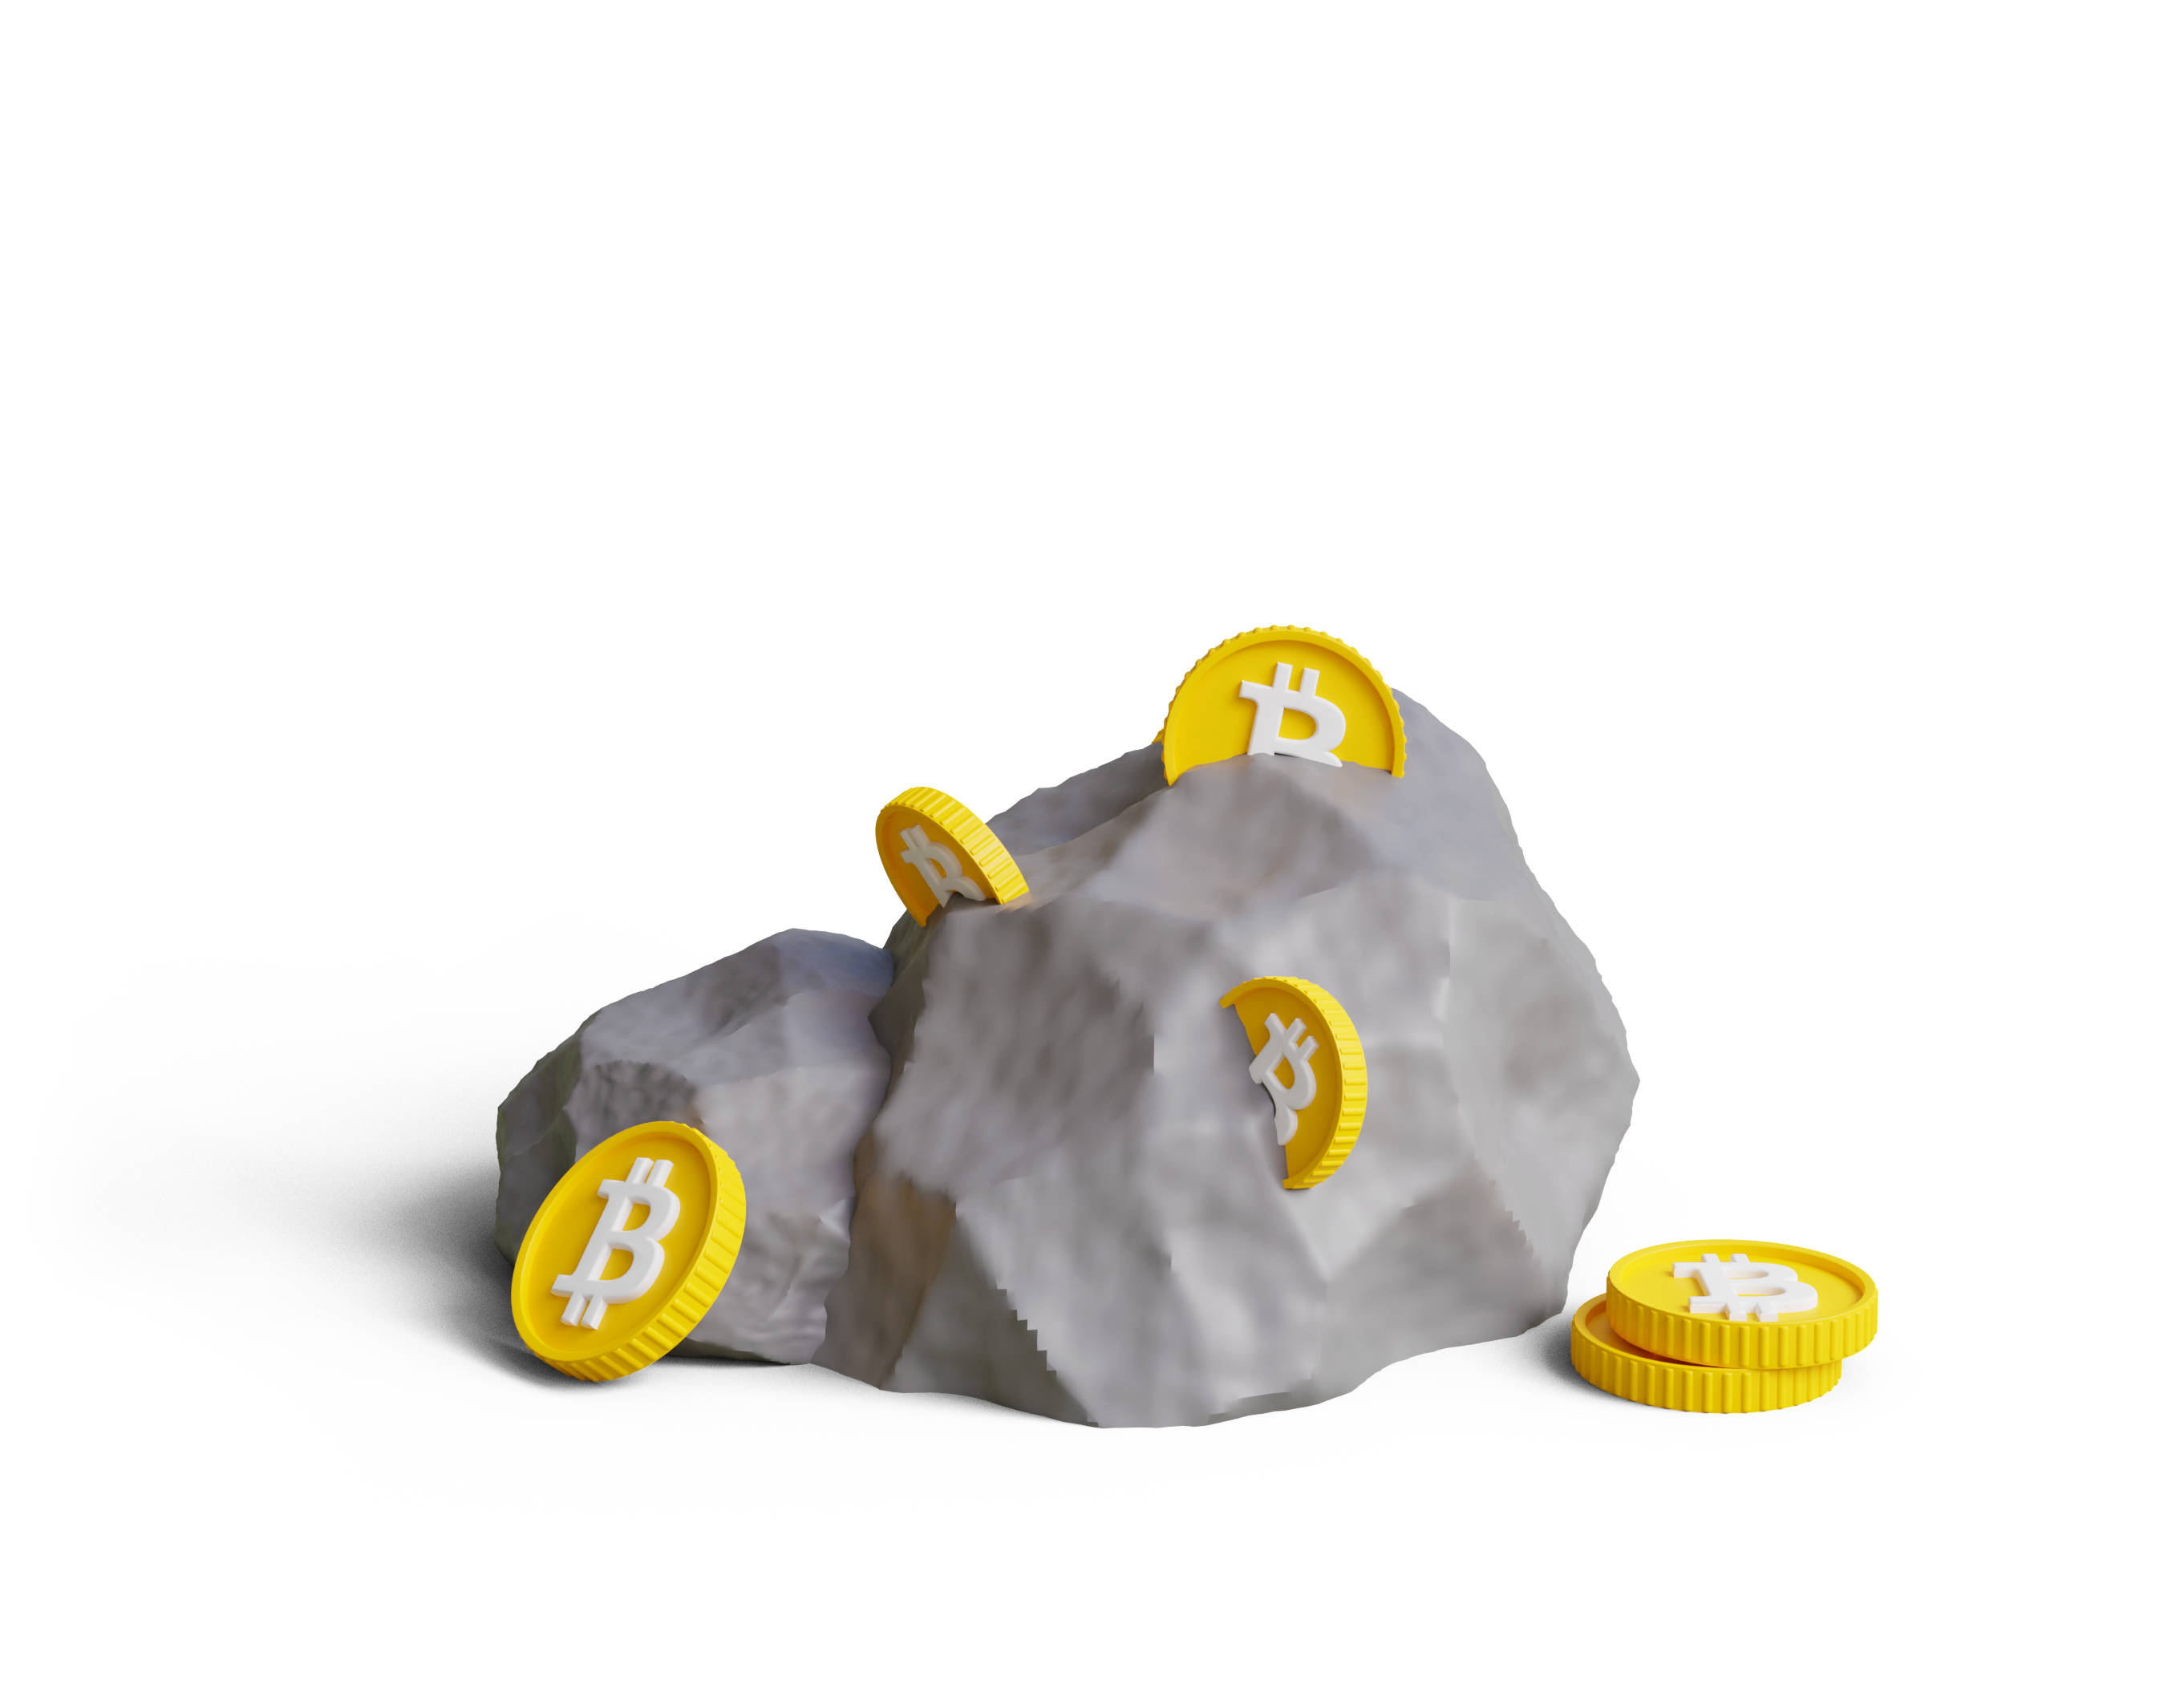 Mining bitcoins image for casino lottery.